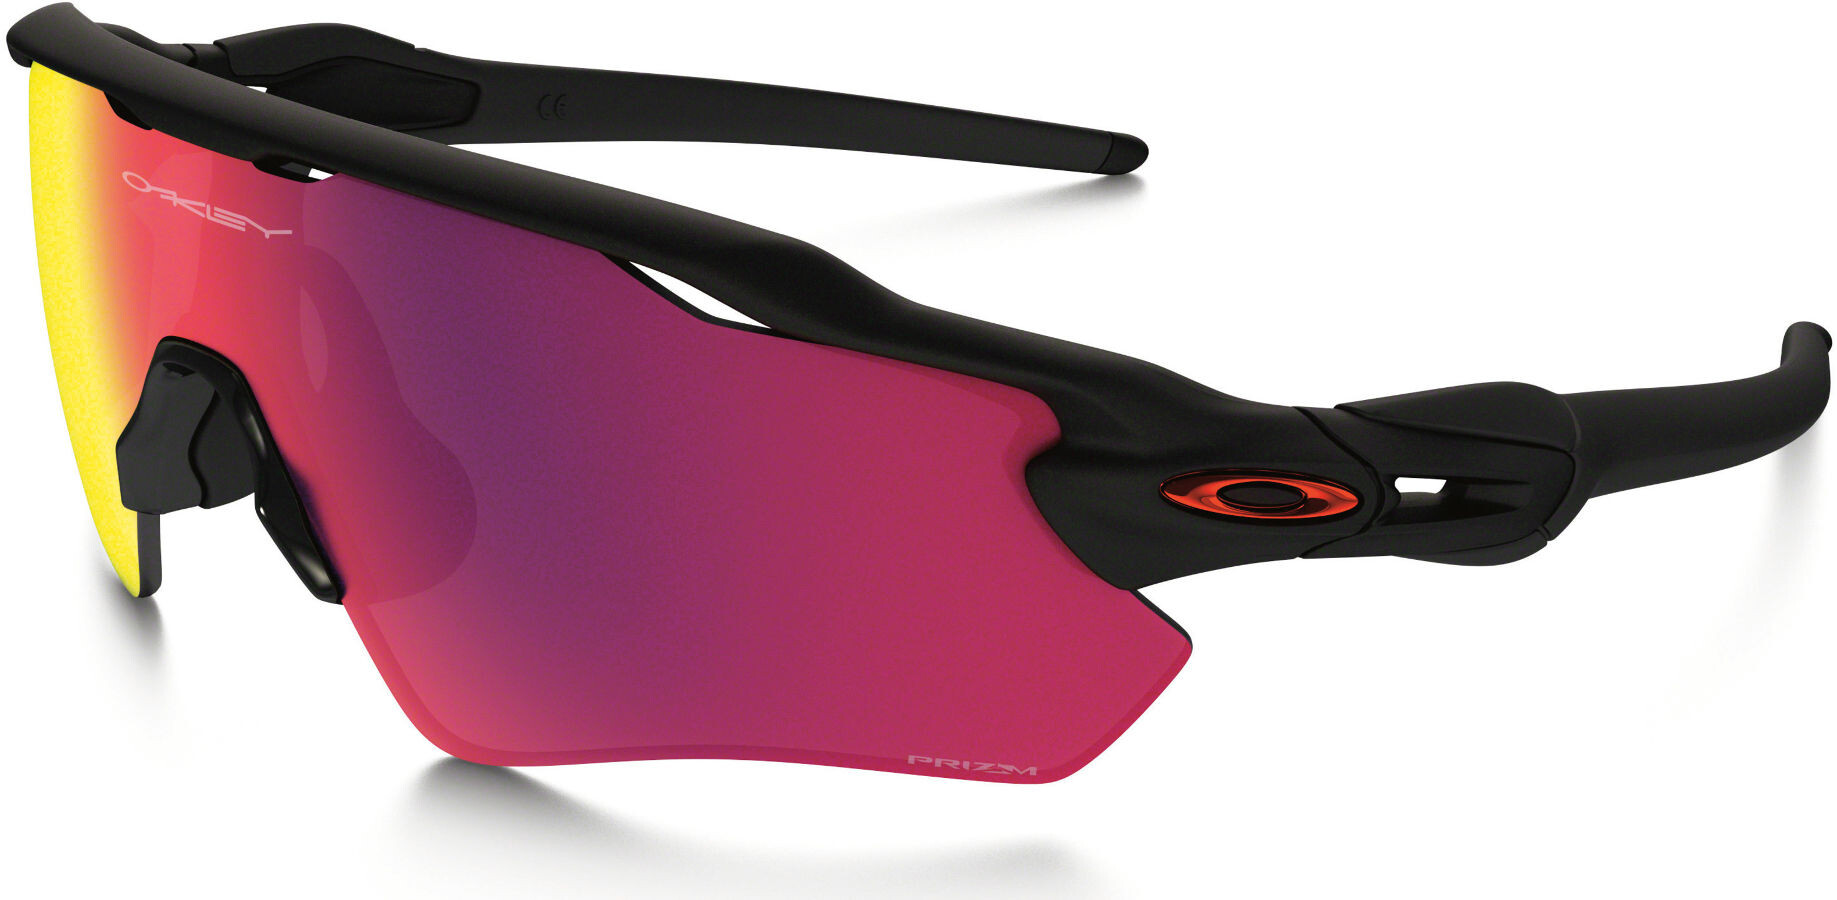 The Ultimate Guide to Choosing the Best Cycling Sunglasses